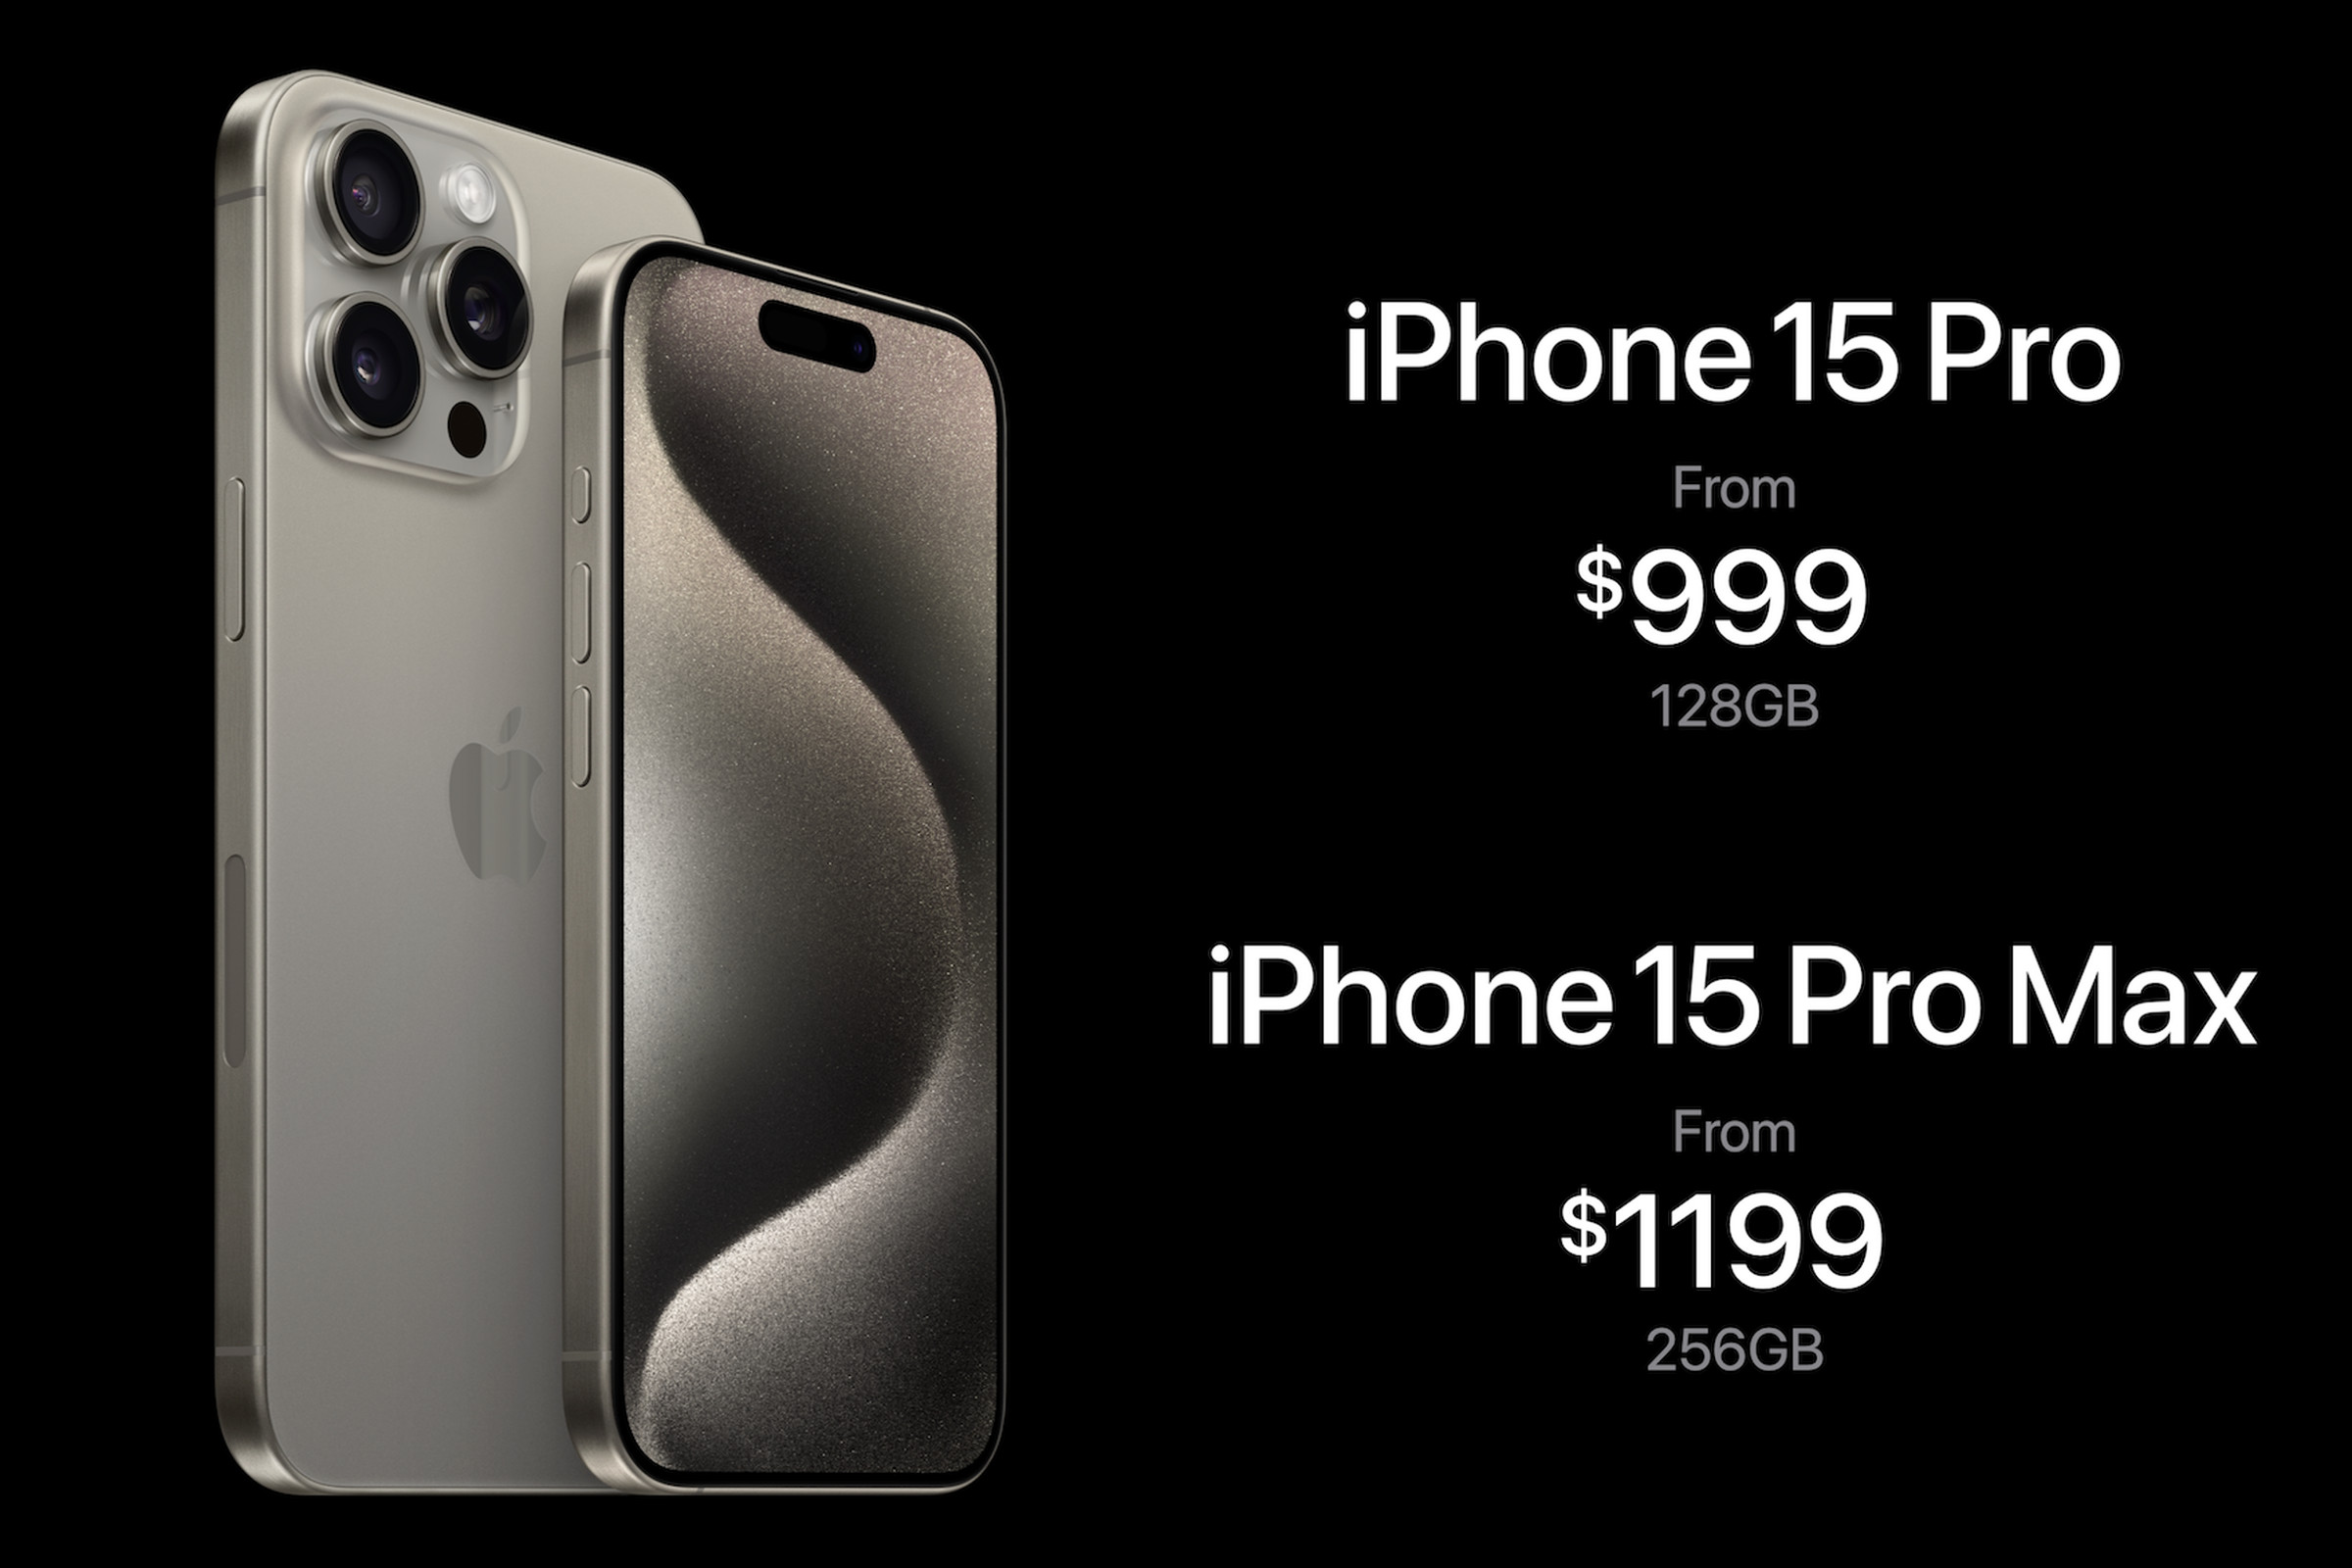 A picture of the iPhone 15 Pro and 15 Pro Max together, with prices listed on the right.